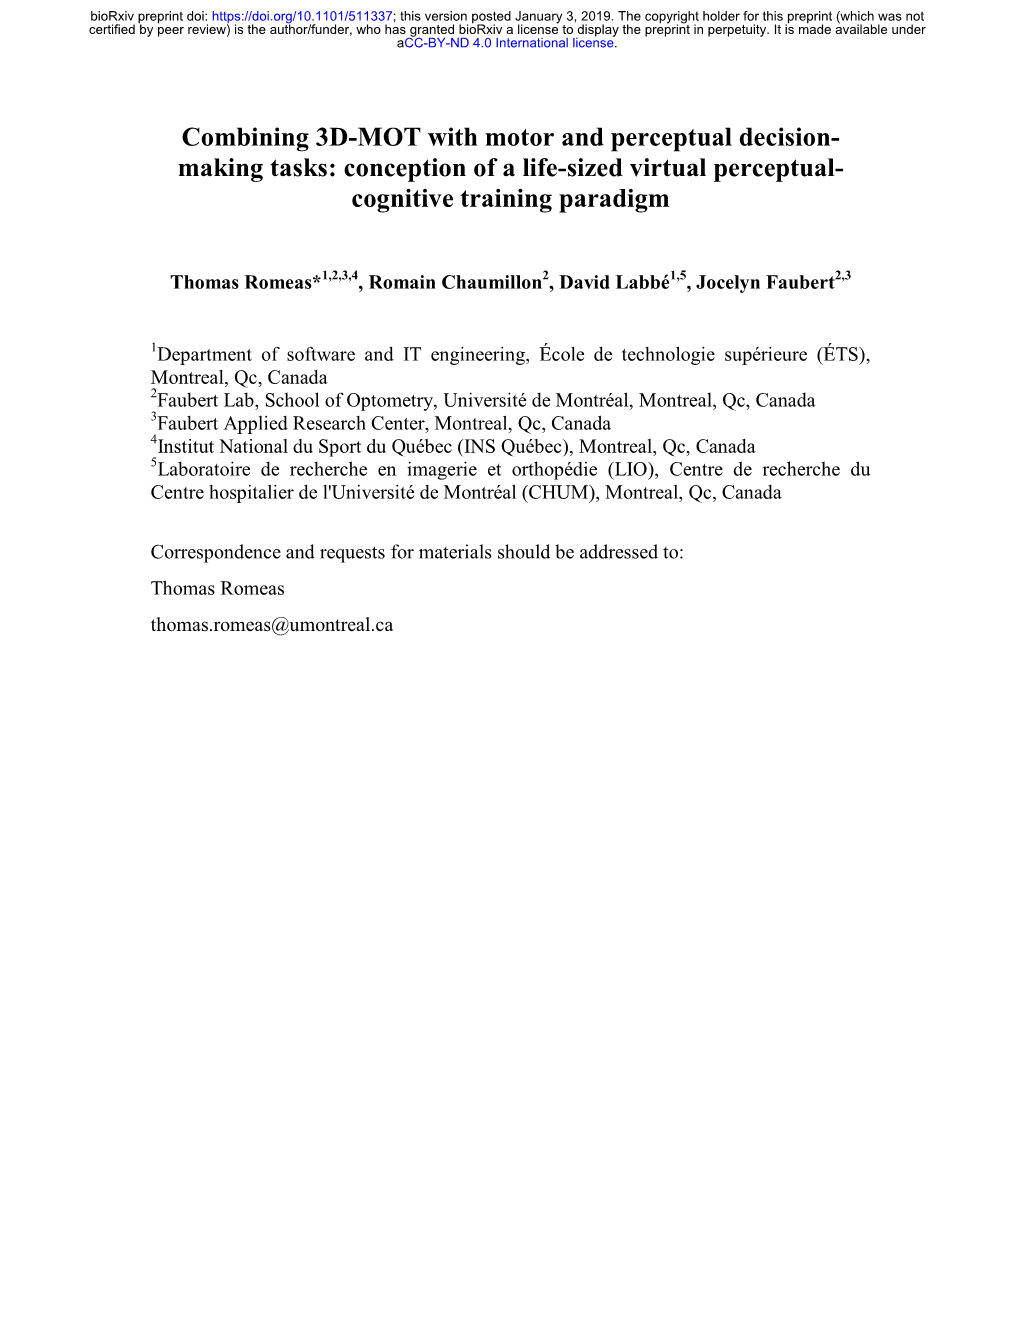 Combining 3D-MOT with Motor and Perceptual Decision- Making Tasks: Conception of a Life-Sized Virtual Perceptual- Cognitive Training Paradigm